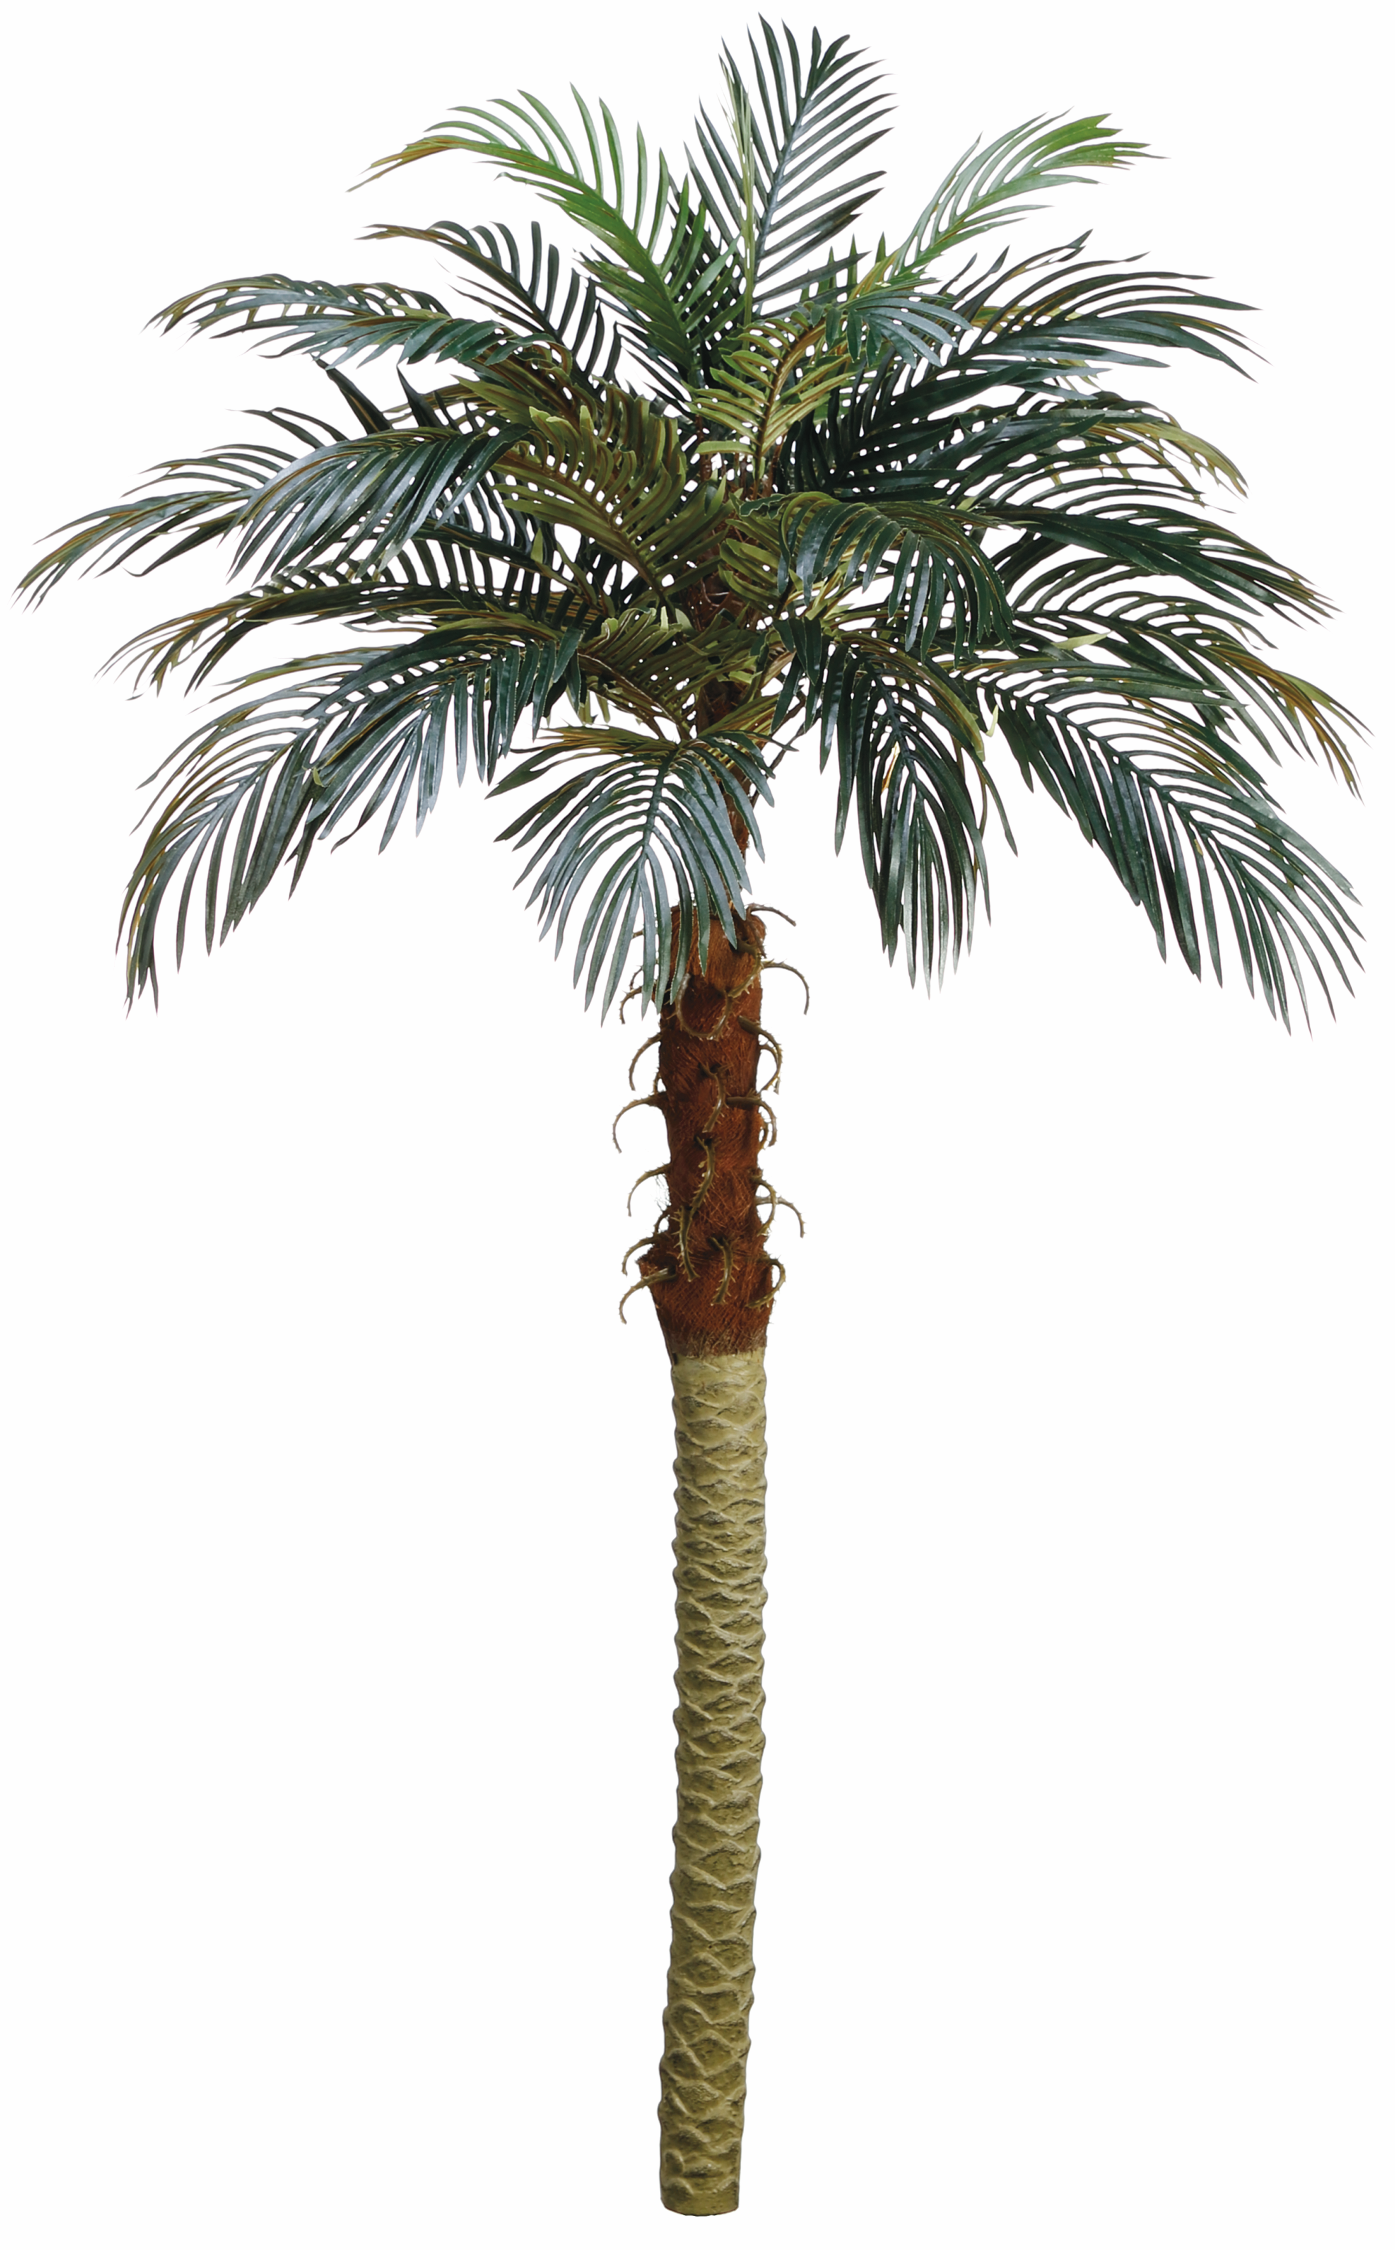 70 inch Artificial Silk Phoenix Palm Tree for Indoor and Outdoor